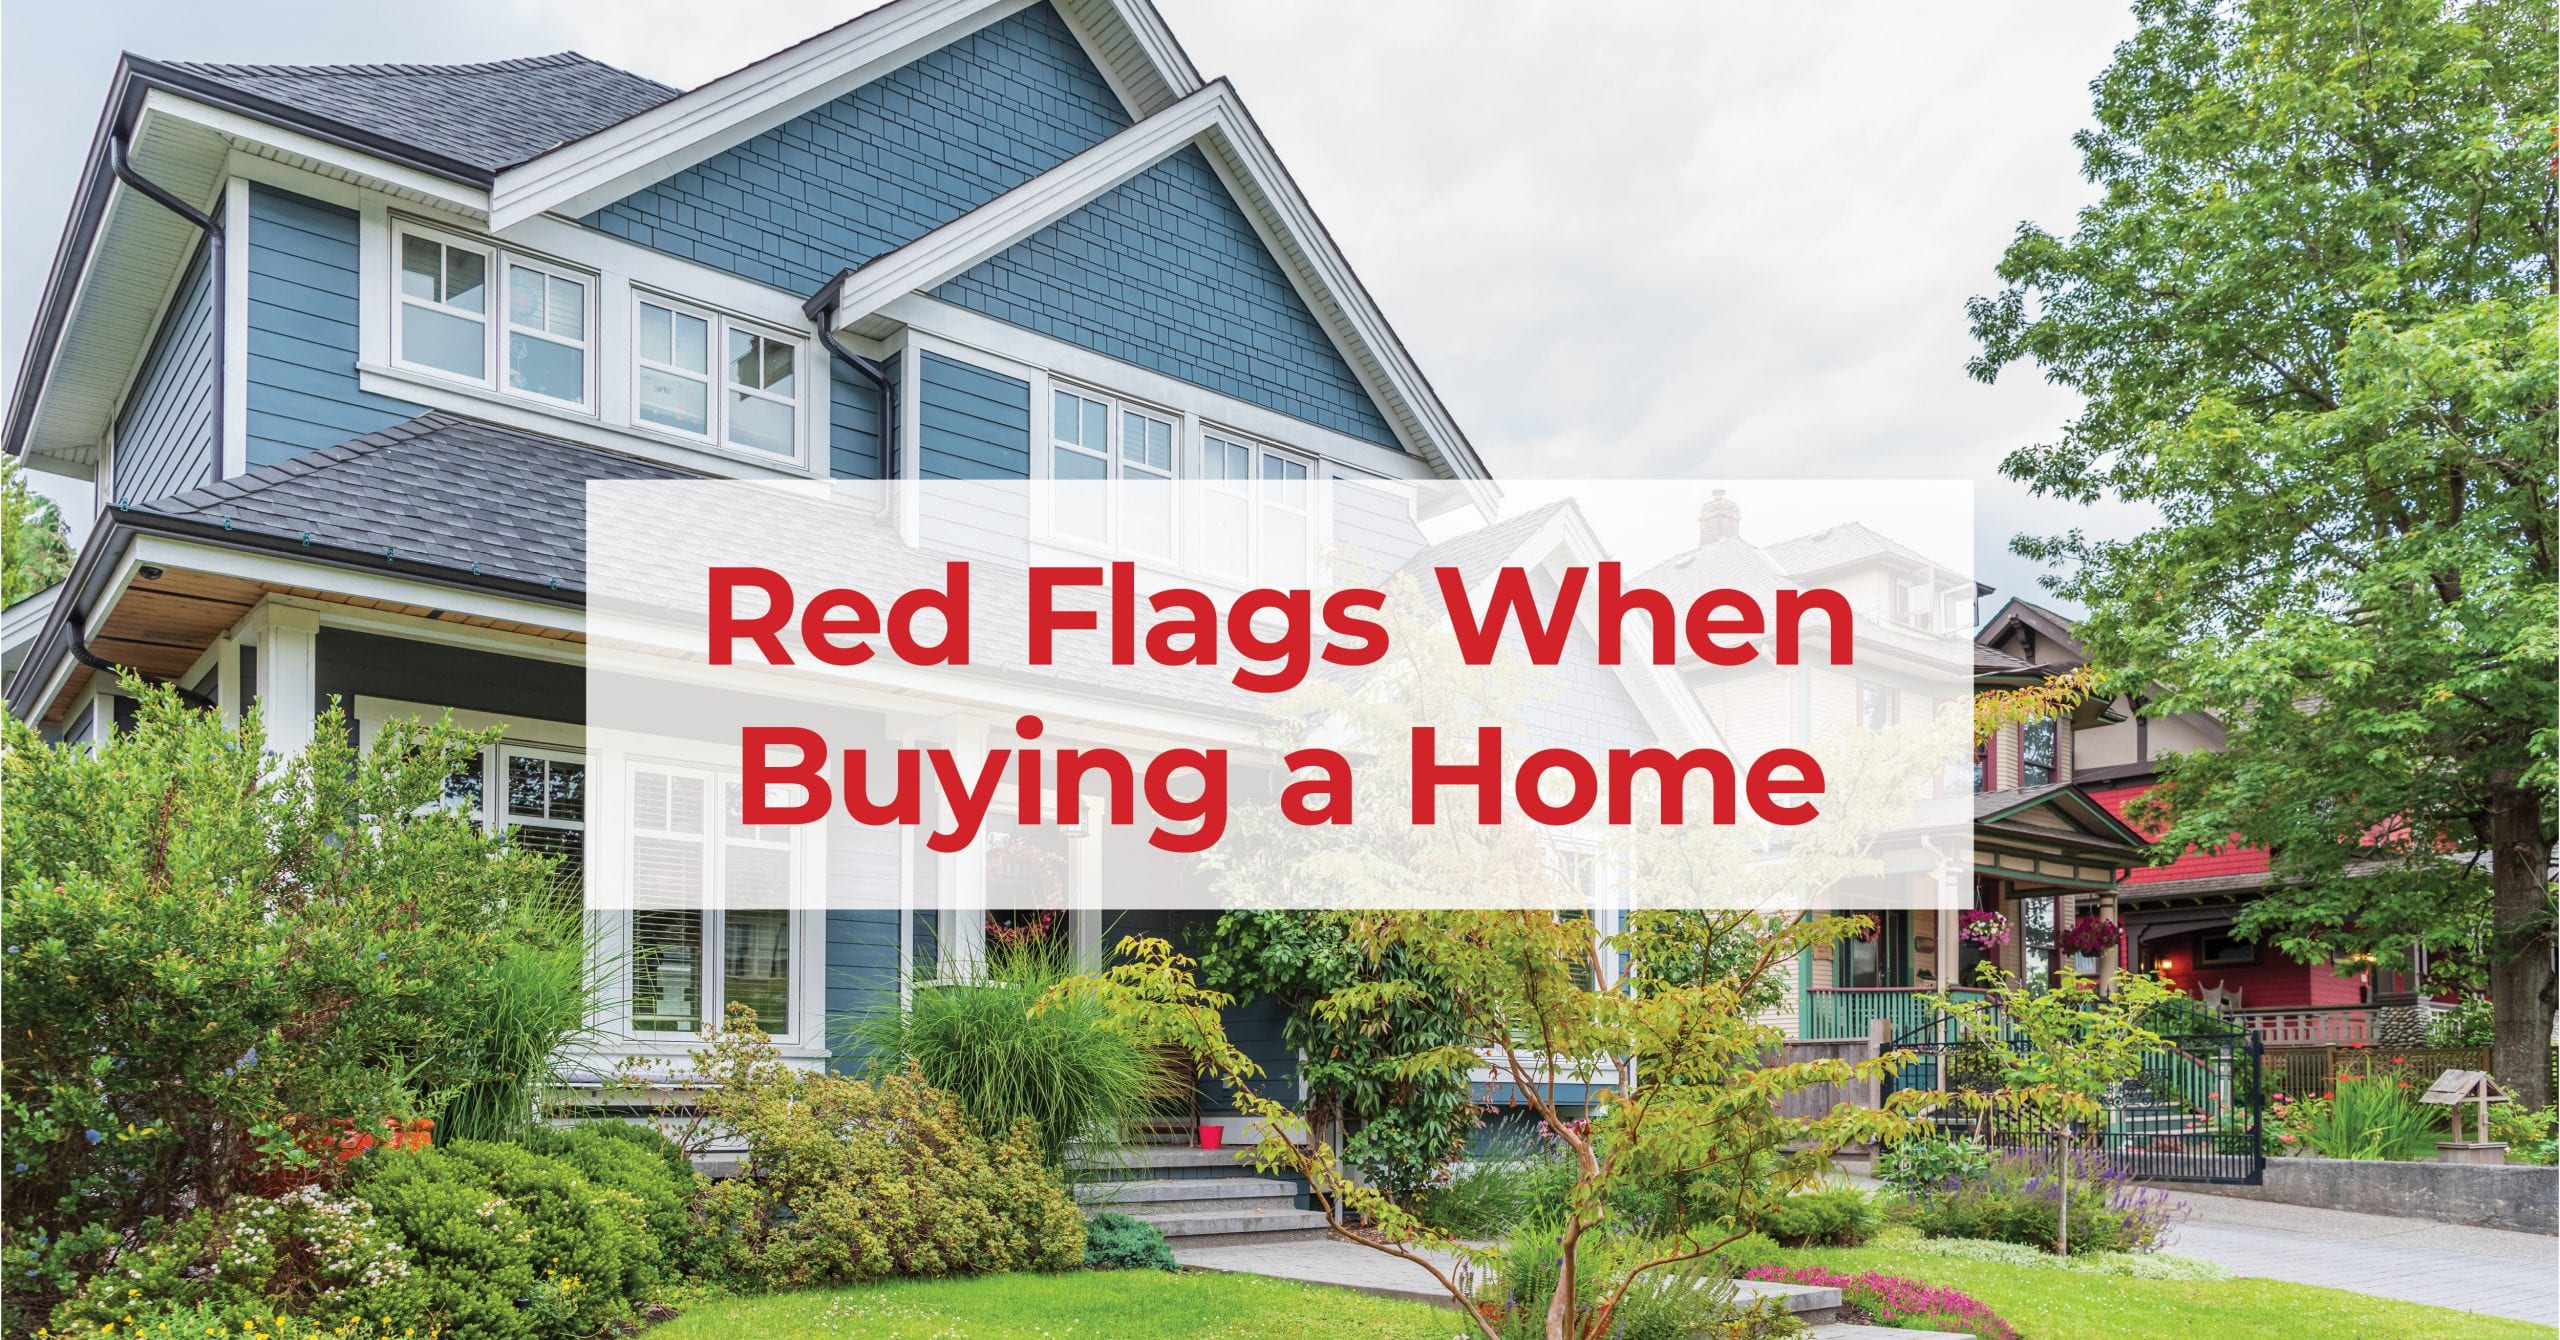 Red flags when buying a home